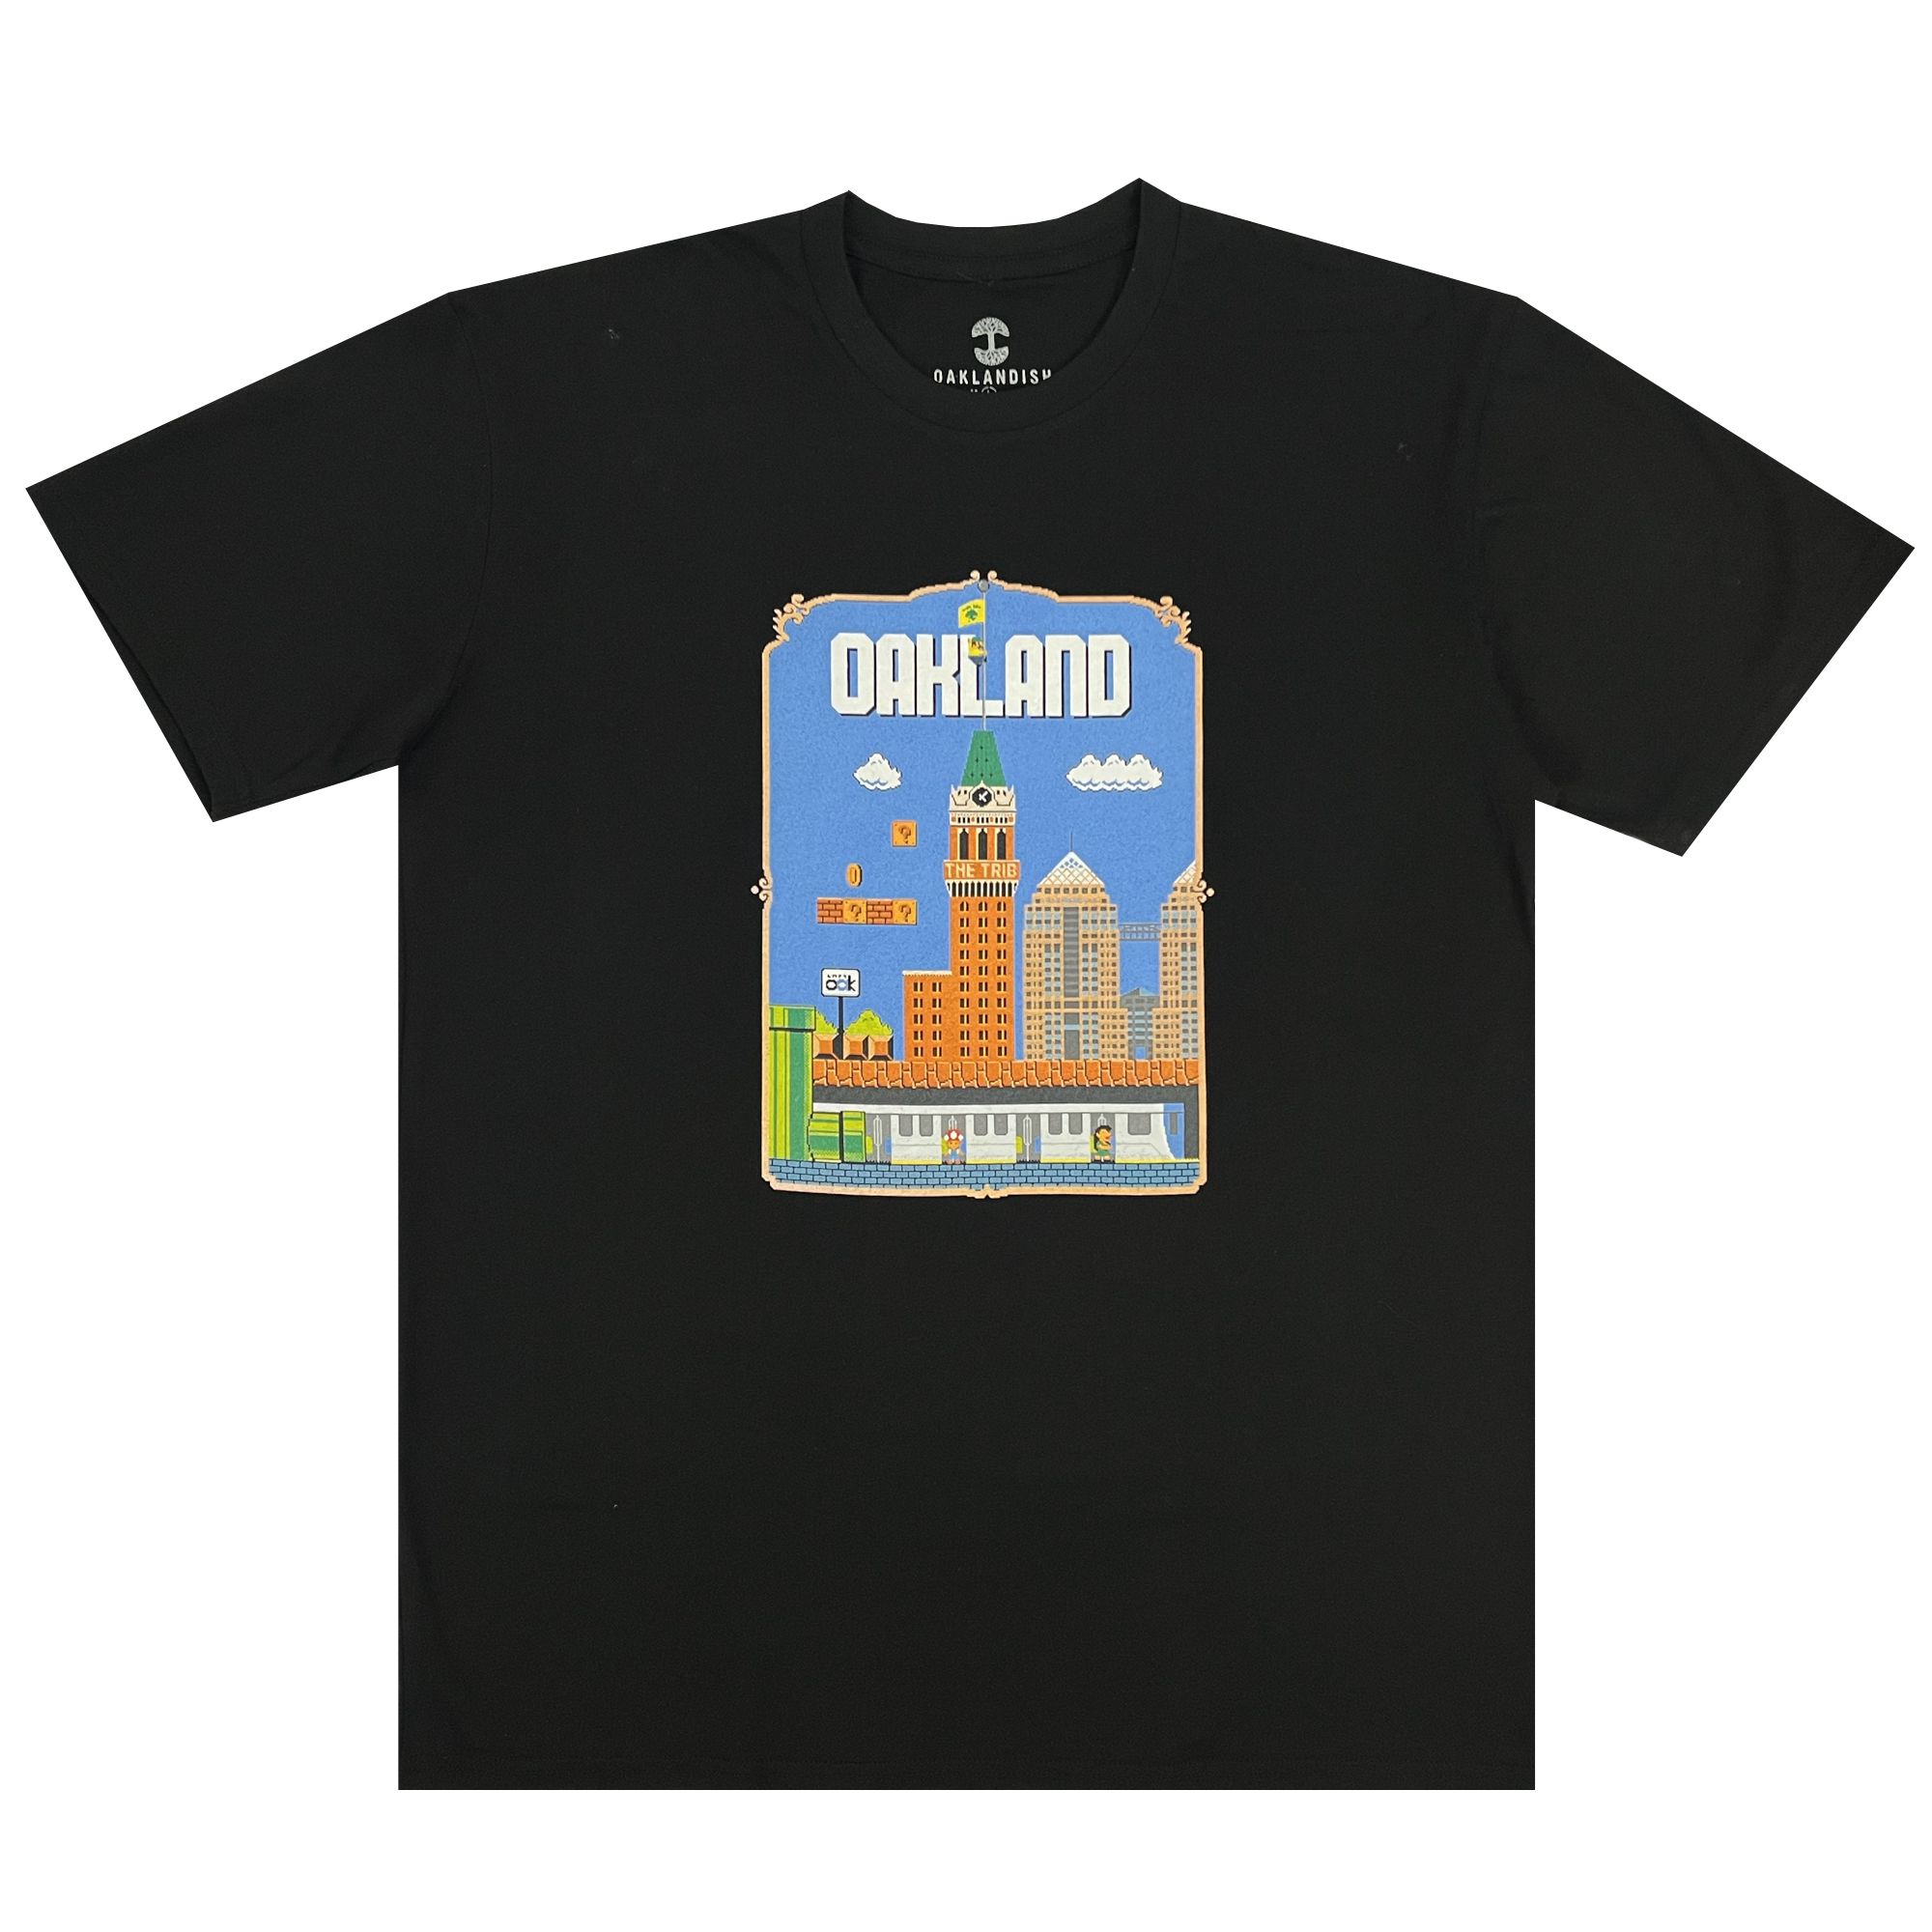 Black t-shirt with Super Mario style graphic with Oakland cityscape.